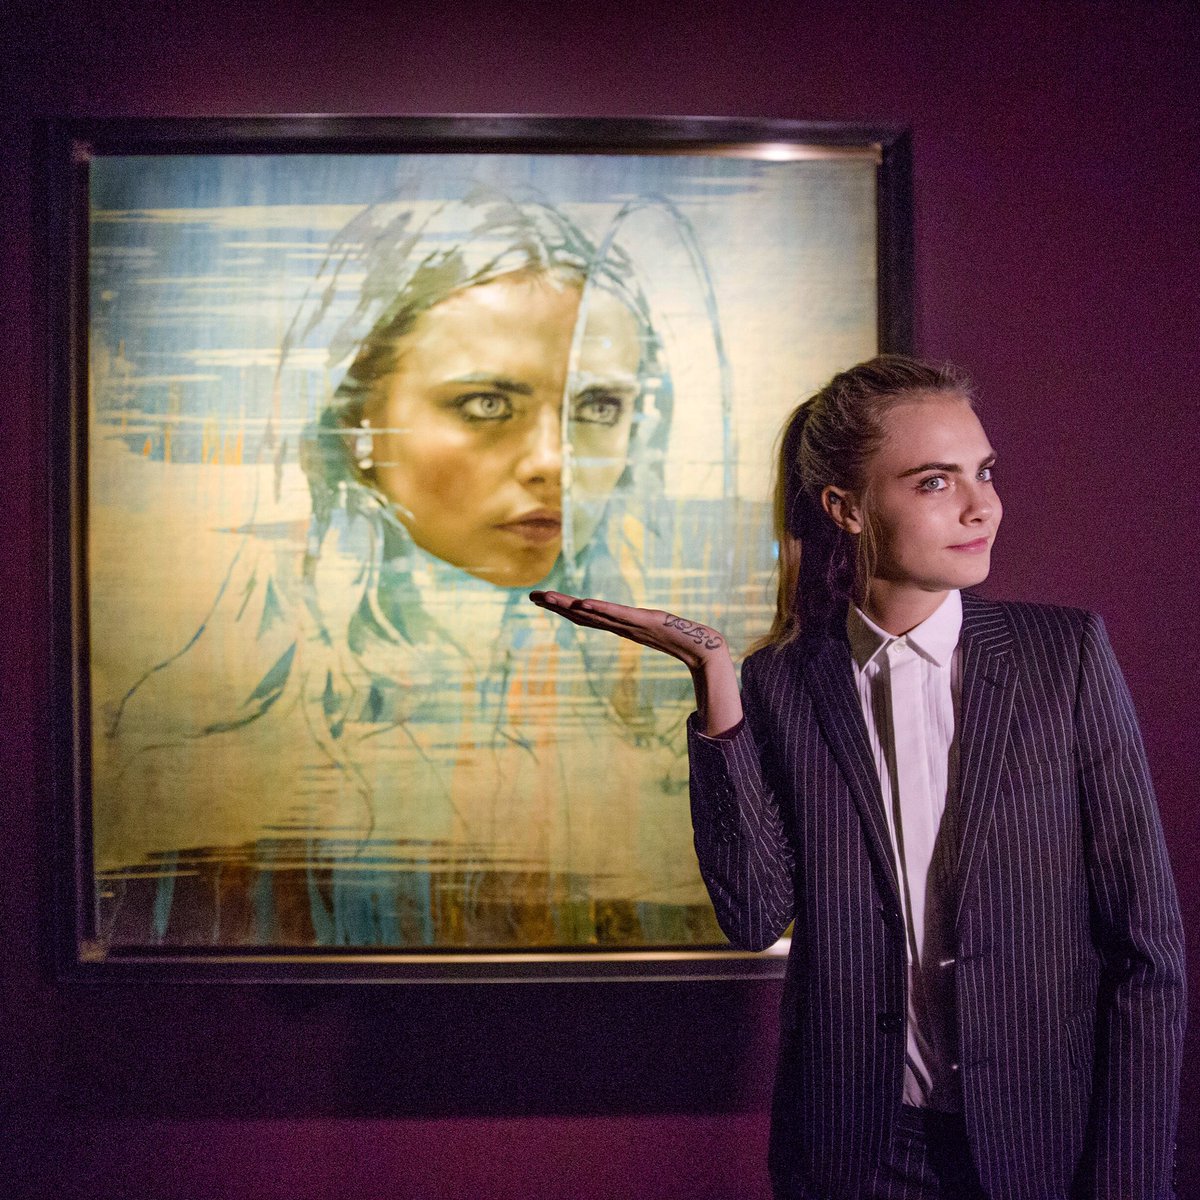 #Thistimelastyear... an exhibition opening in Denmark 
@caradelevingne @mus_nat_his #jonathanyeoportraits #retrospective